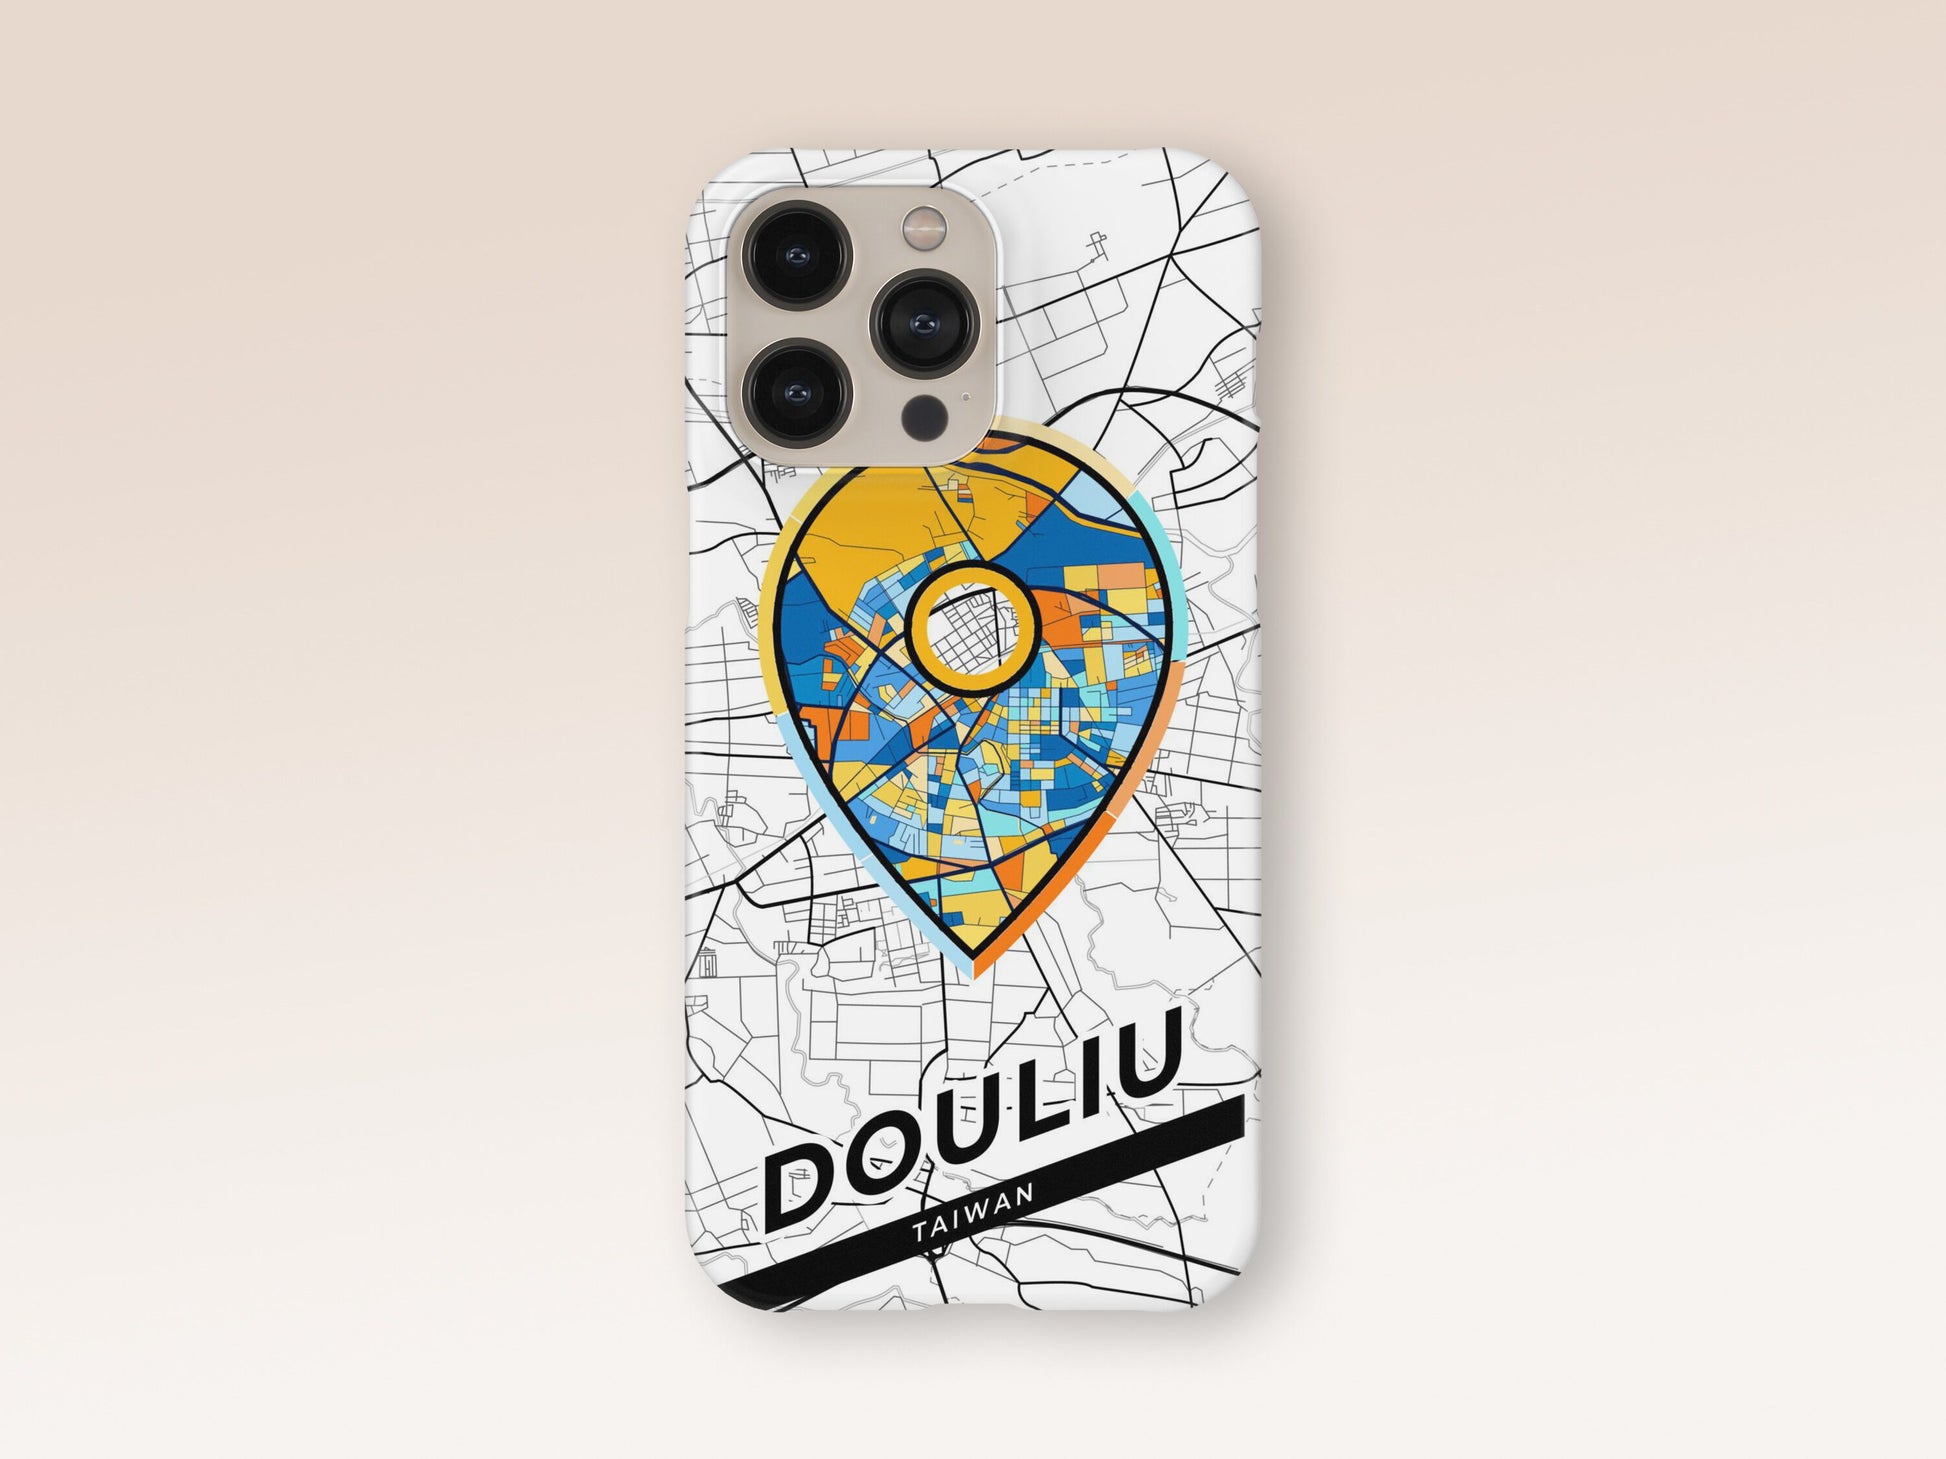 Douliu Taiwan slim phone case with colorful icon. Birthday, wedding or housewarming gift. Couple match cases. 1